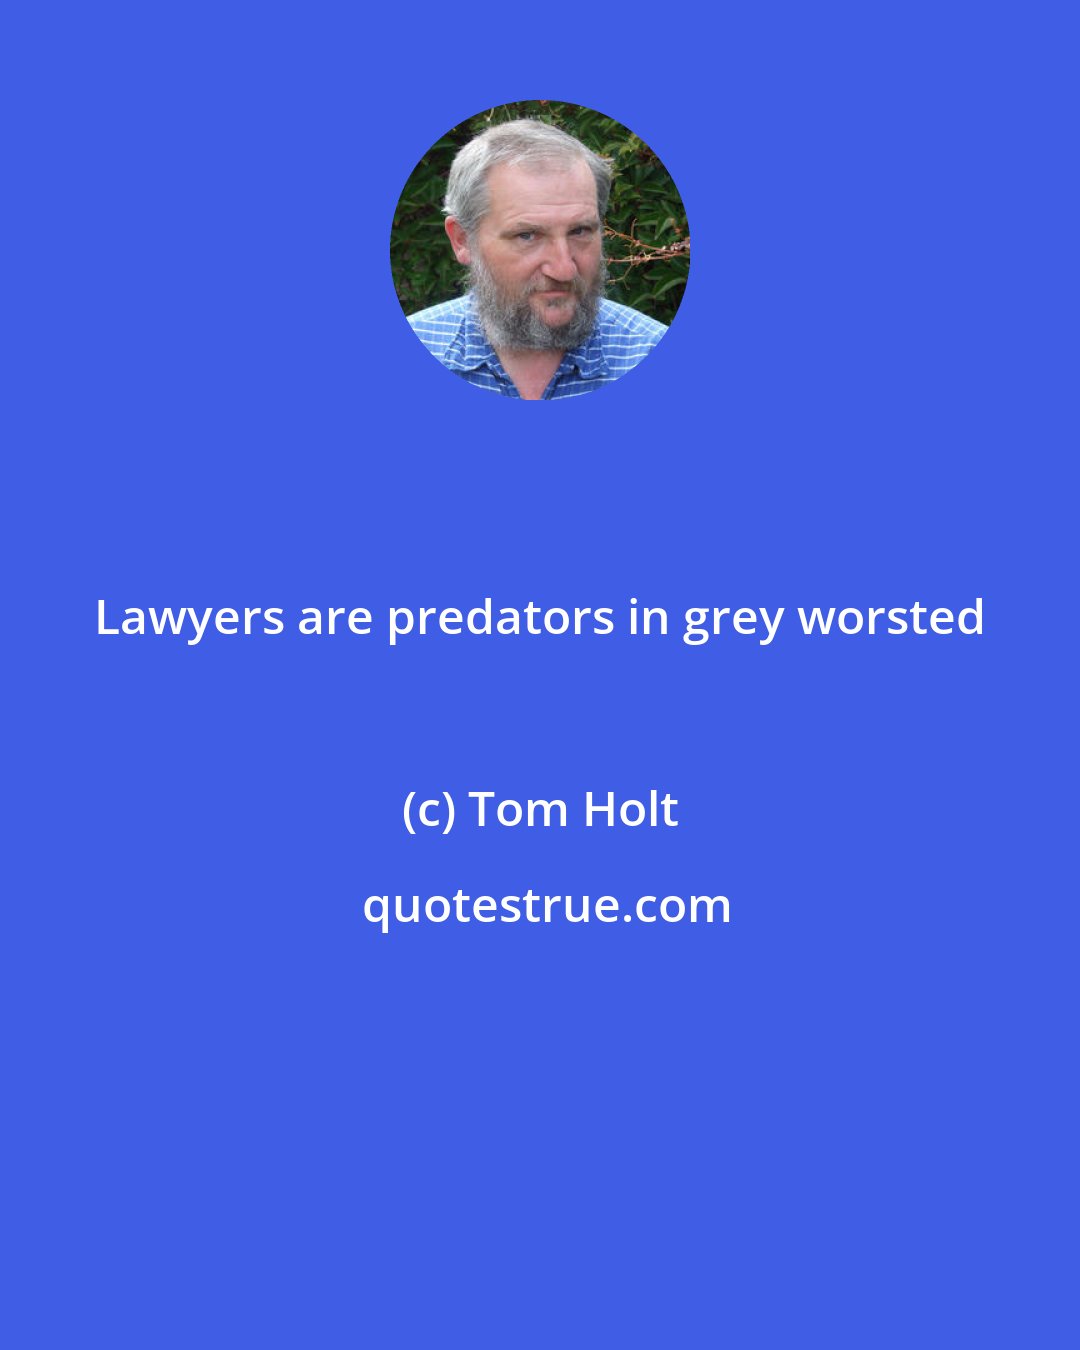 Tom Holt: Lawyers are predators in grey worsted